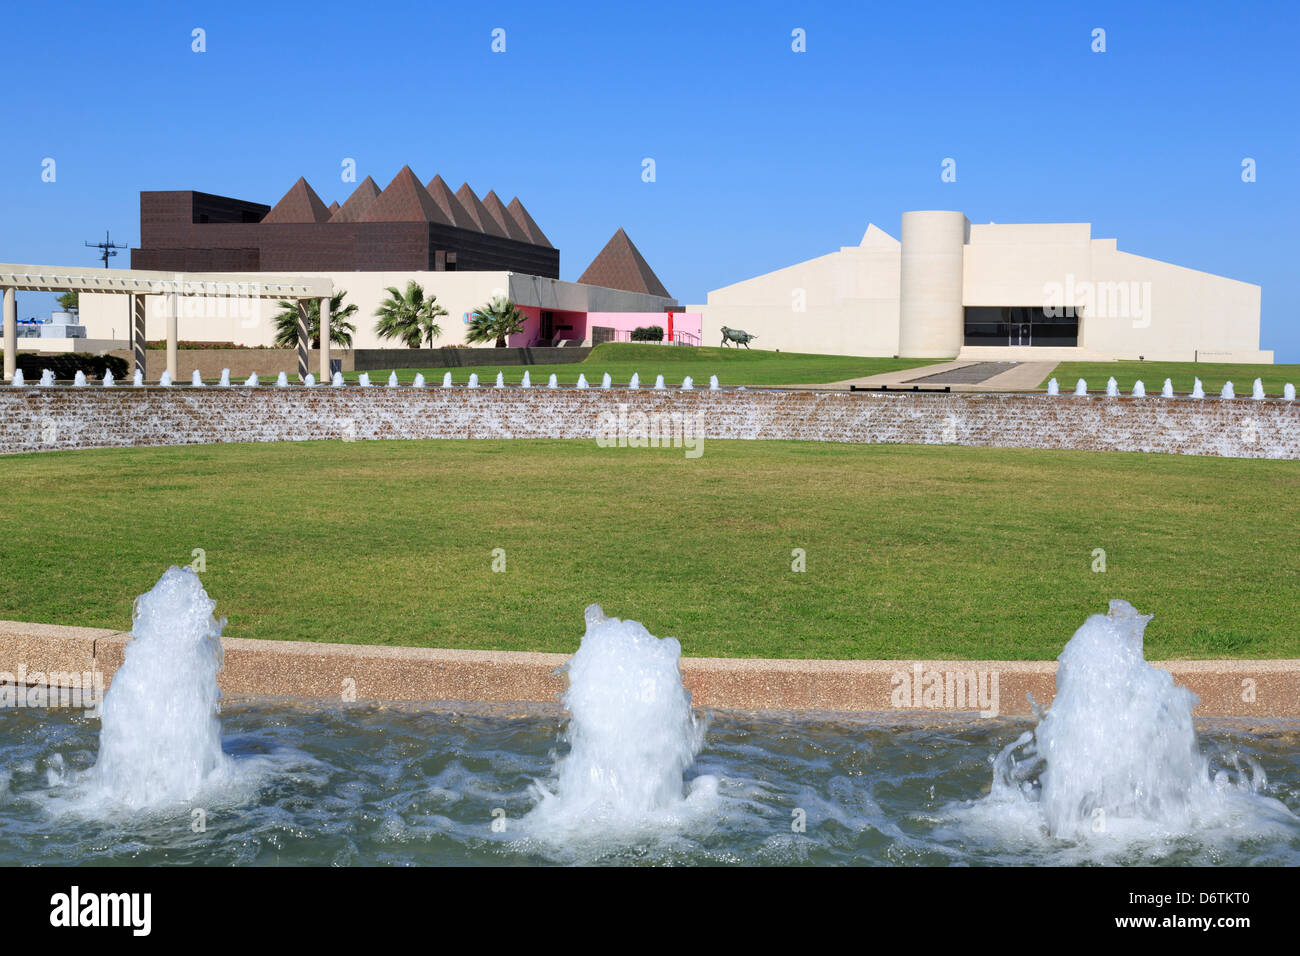 Fountain In Garden At A Museum Art Museum Of South Texas Corpus